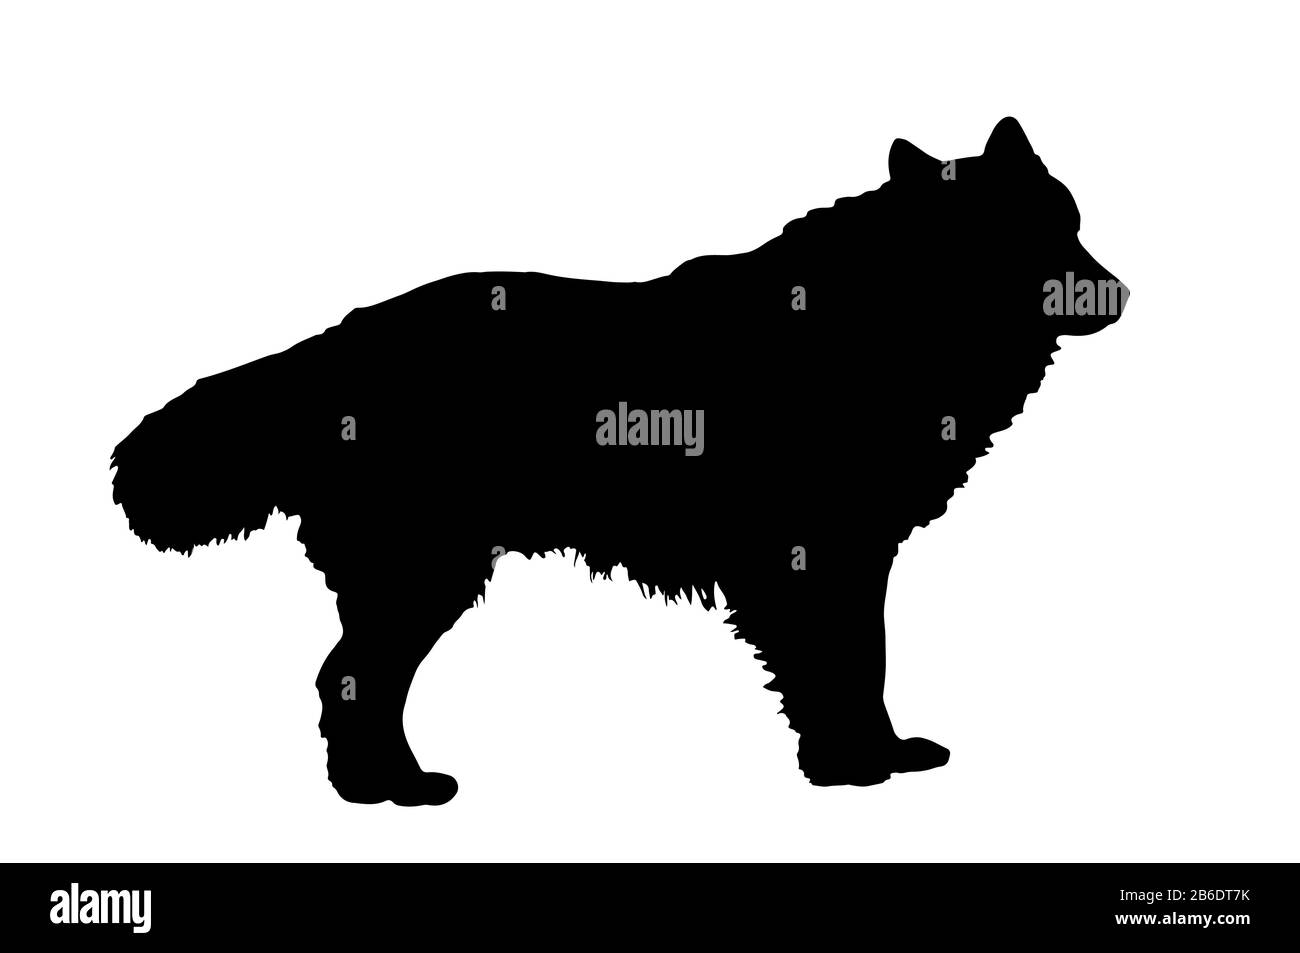 vector illustration of black dog, simple style Stock Photo